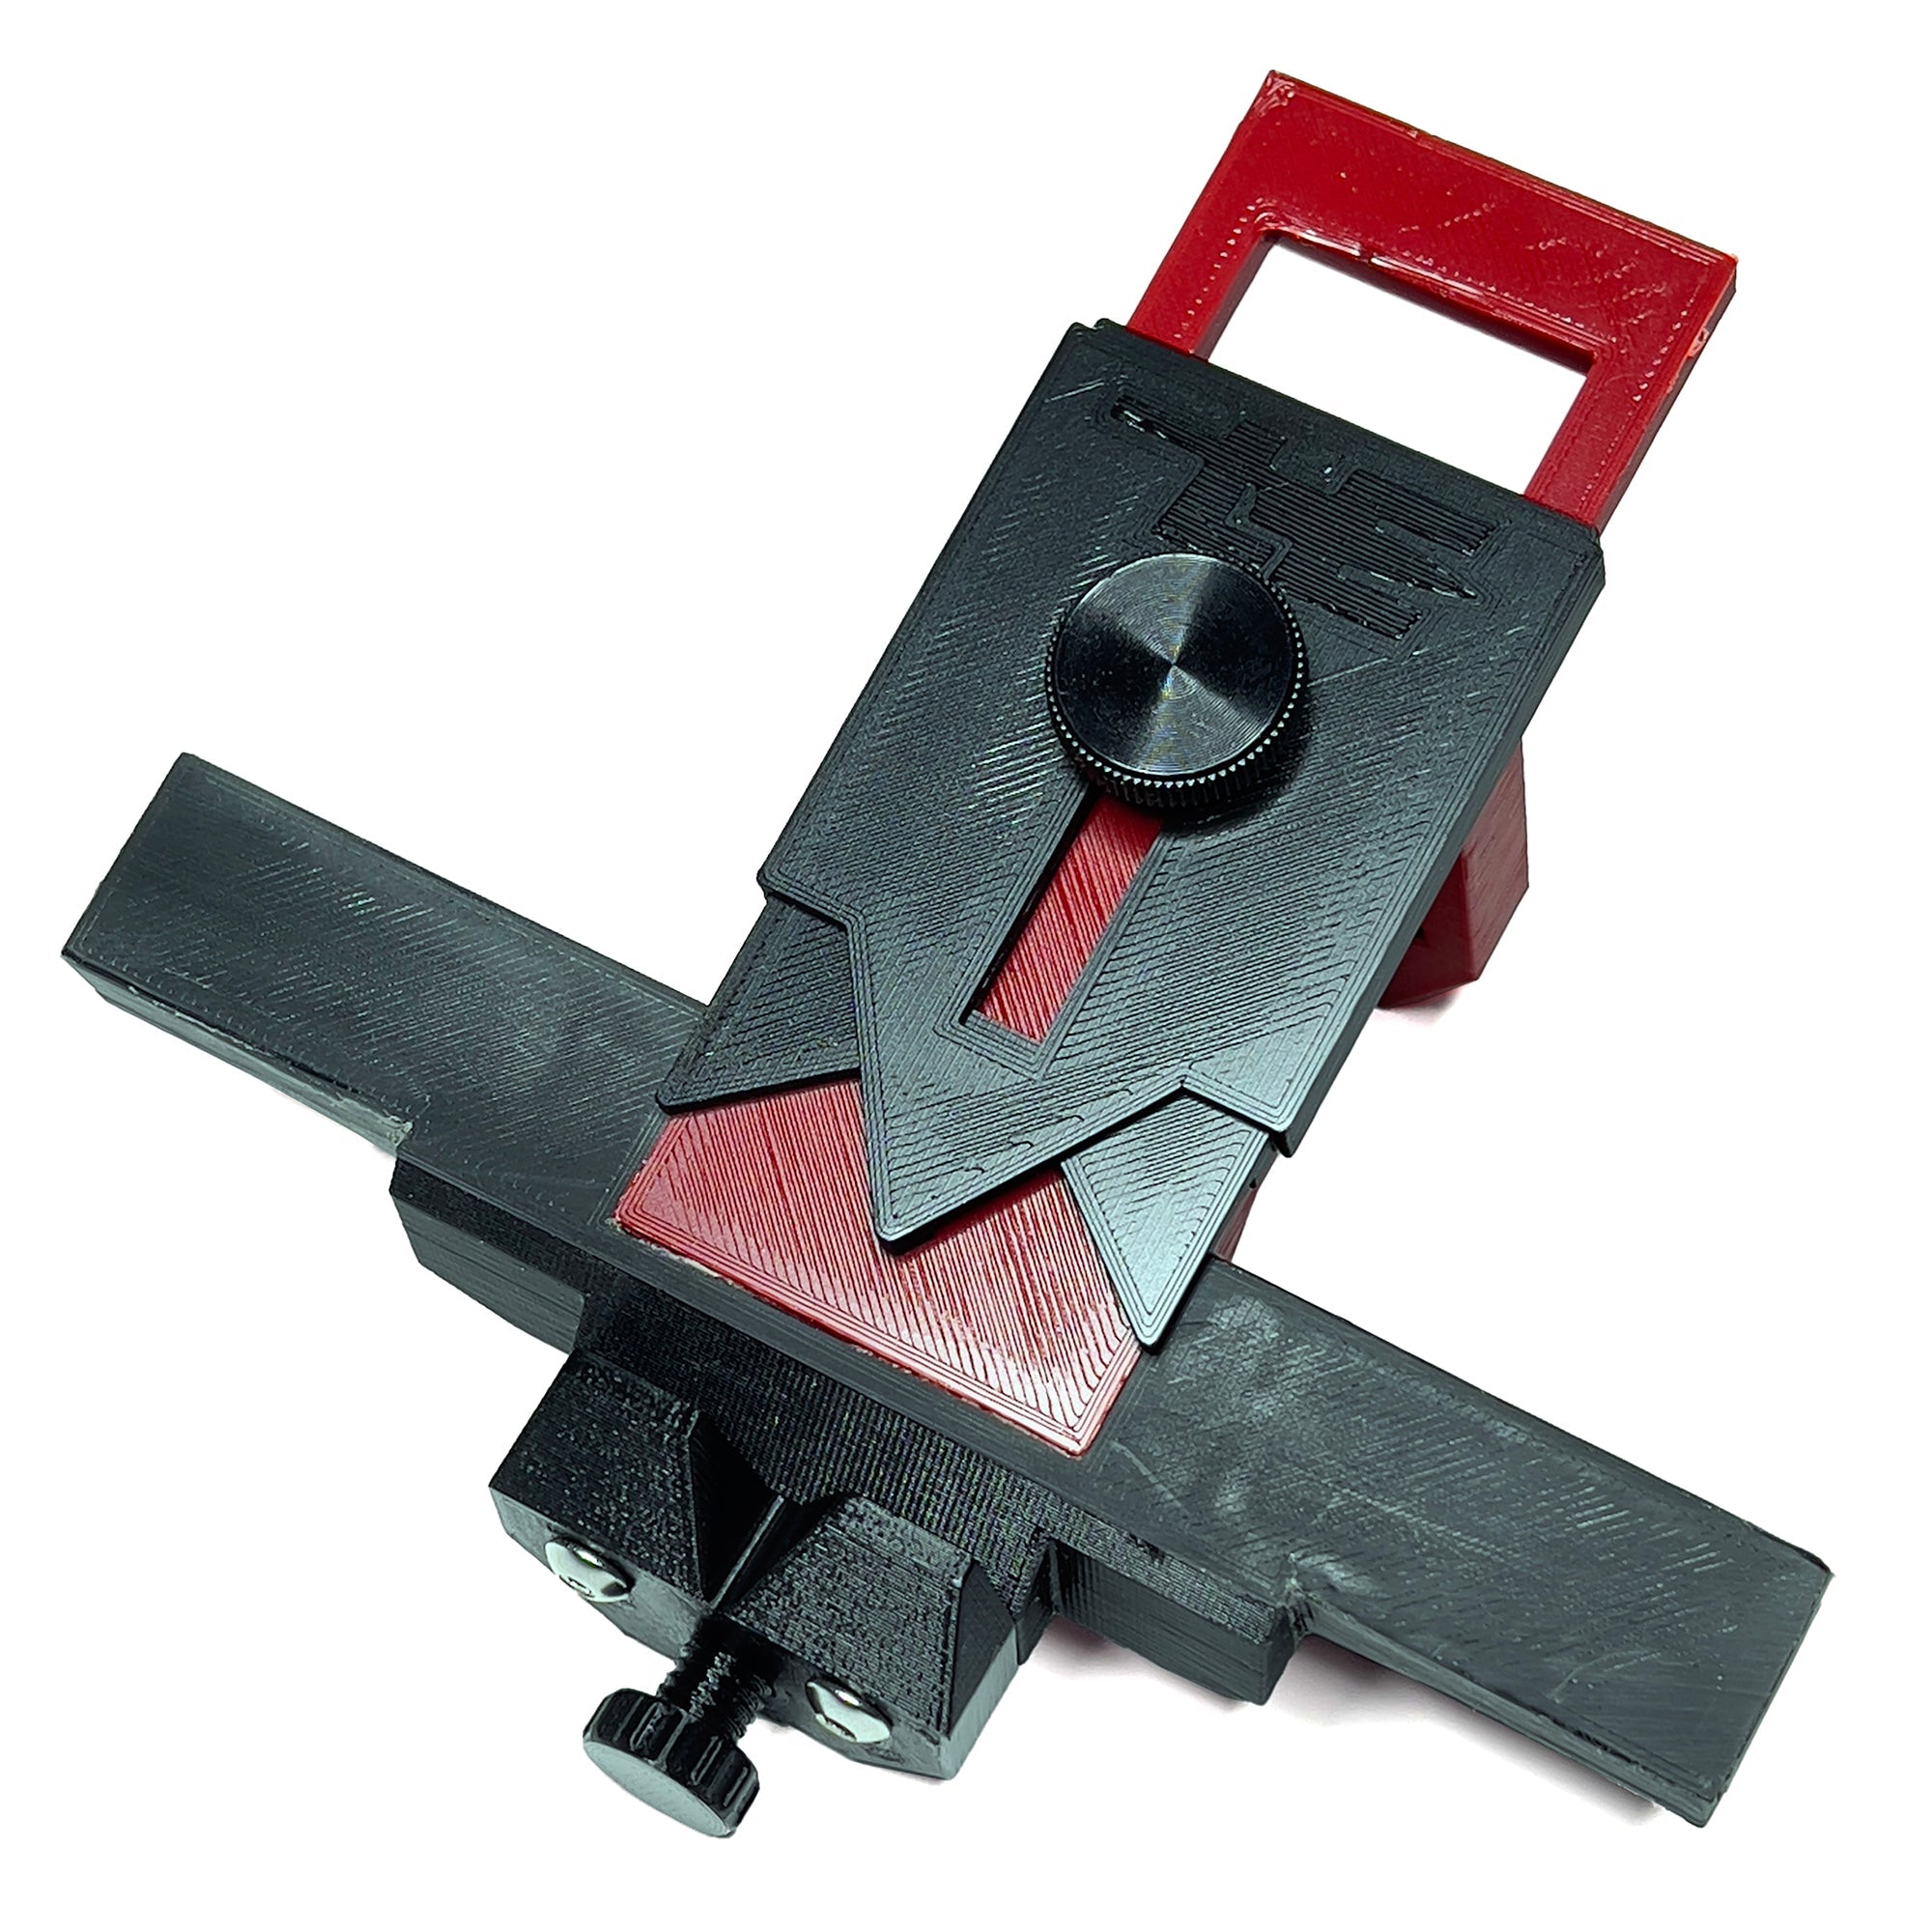 Worksharp Support Brace and Angle Setting Guides for Work Sharp